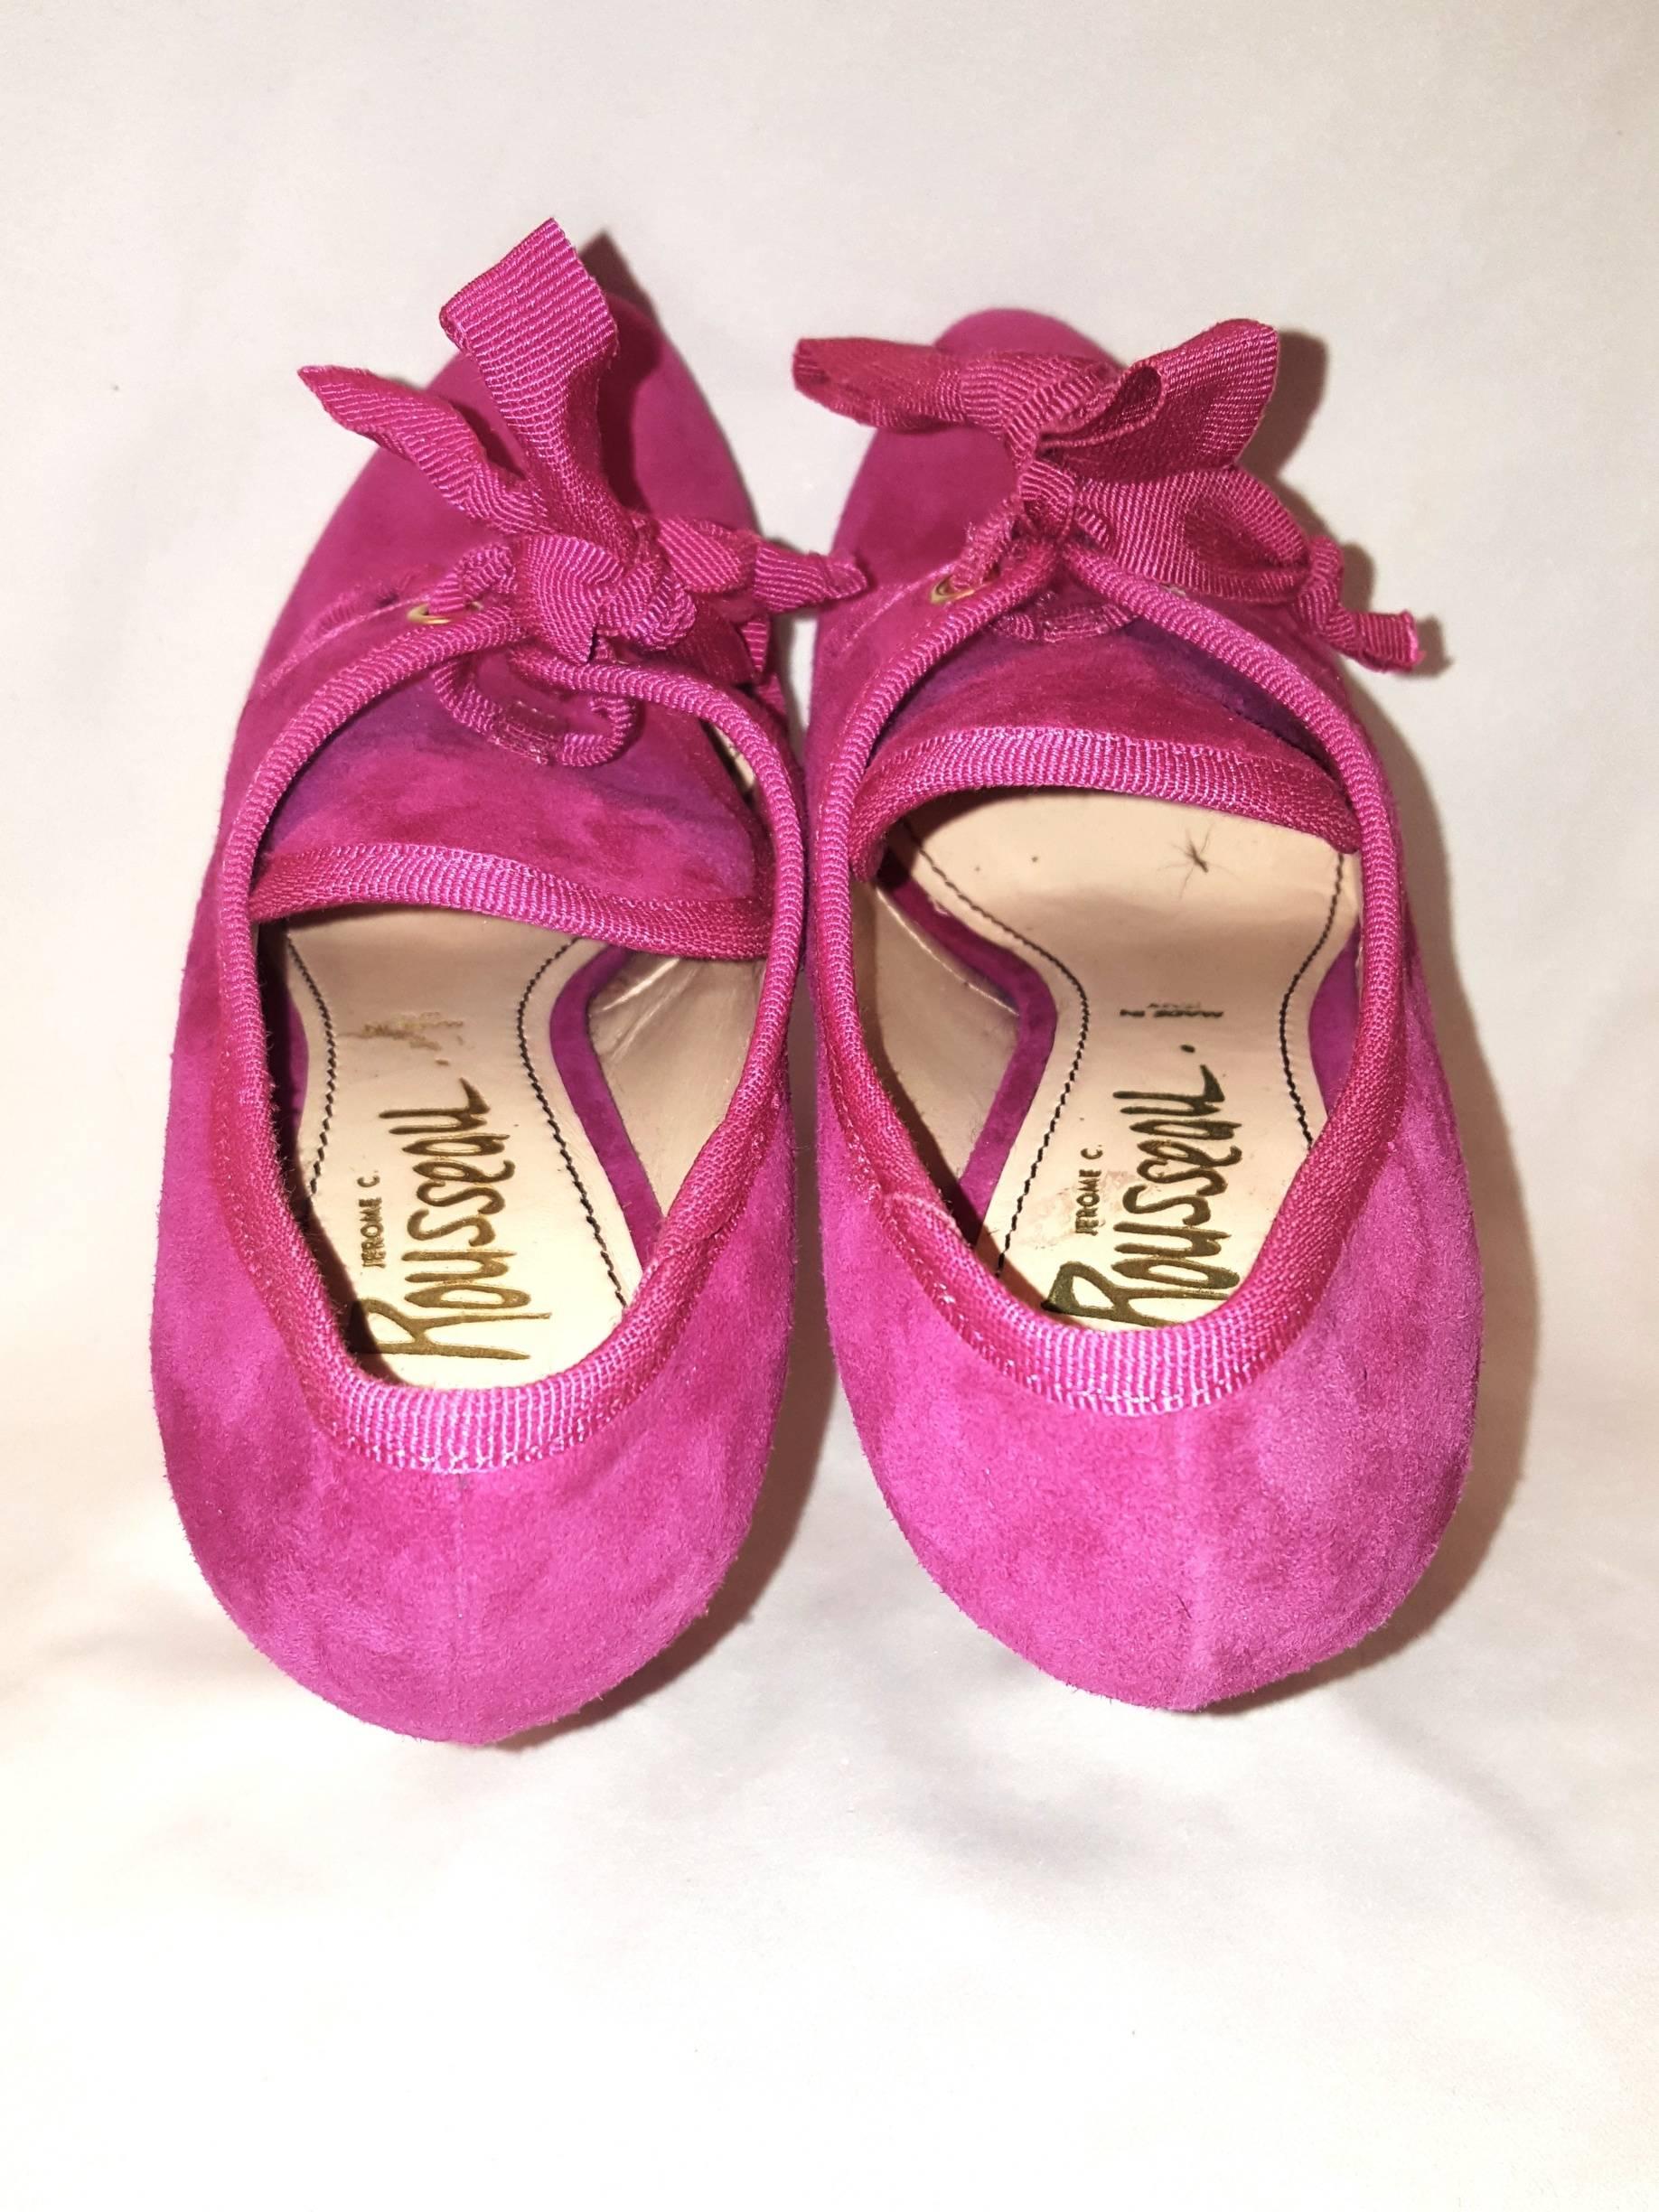 Jerome C. Rousseau Fuchia Suede Pumps with Bow Closure In Excellent Condition For Sale In Palm Beach, FL